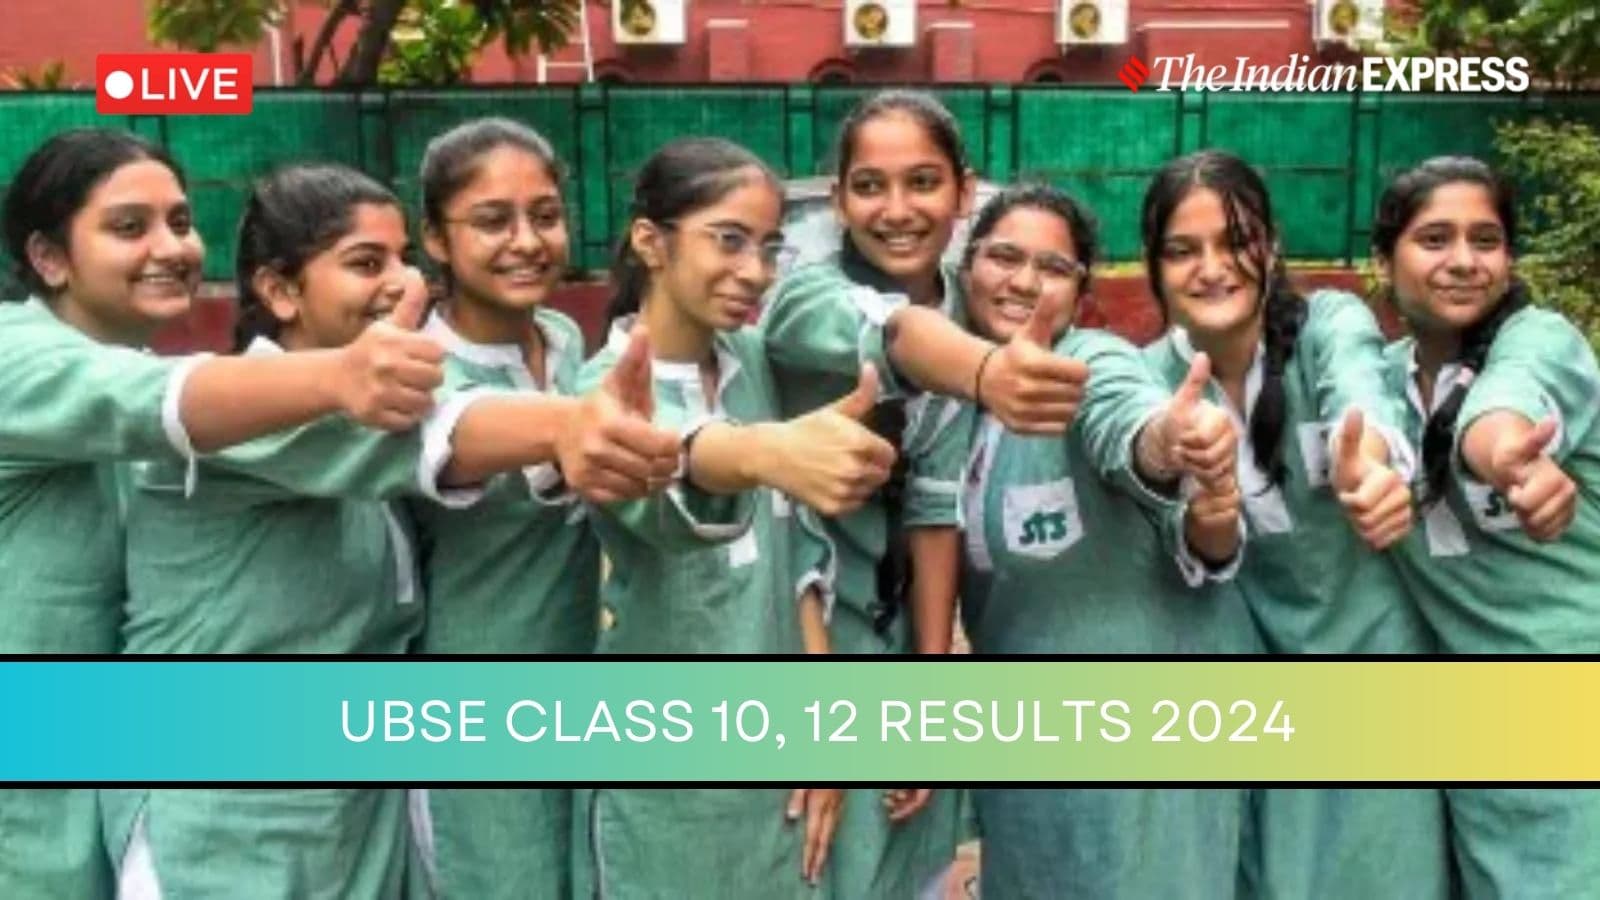 UBSE Uttarakhand Board Result 2024 Live: Class 10, 12 results soon at ubse.uk.gov.in